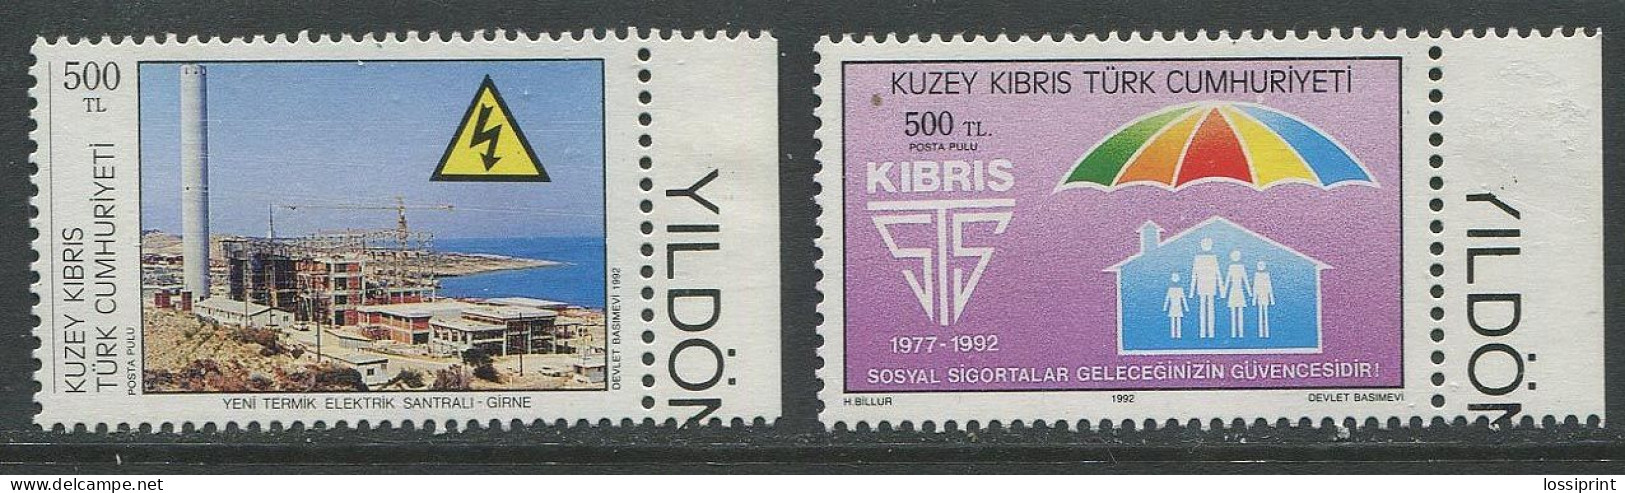 Turkey:Unused Stamps Electric Station And Social Theme, 1992, MNH - Ongebruikt